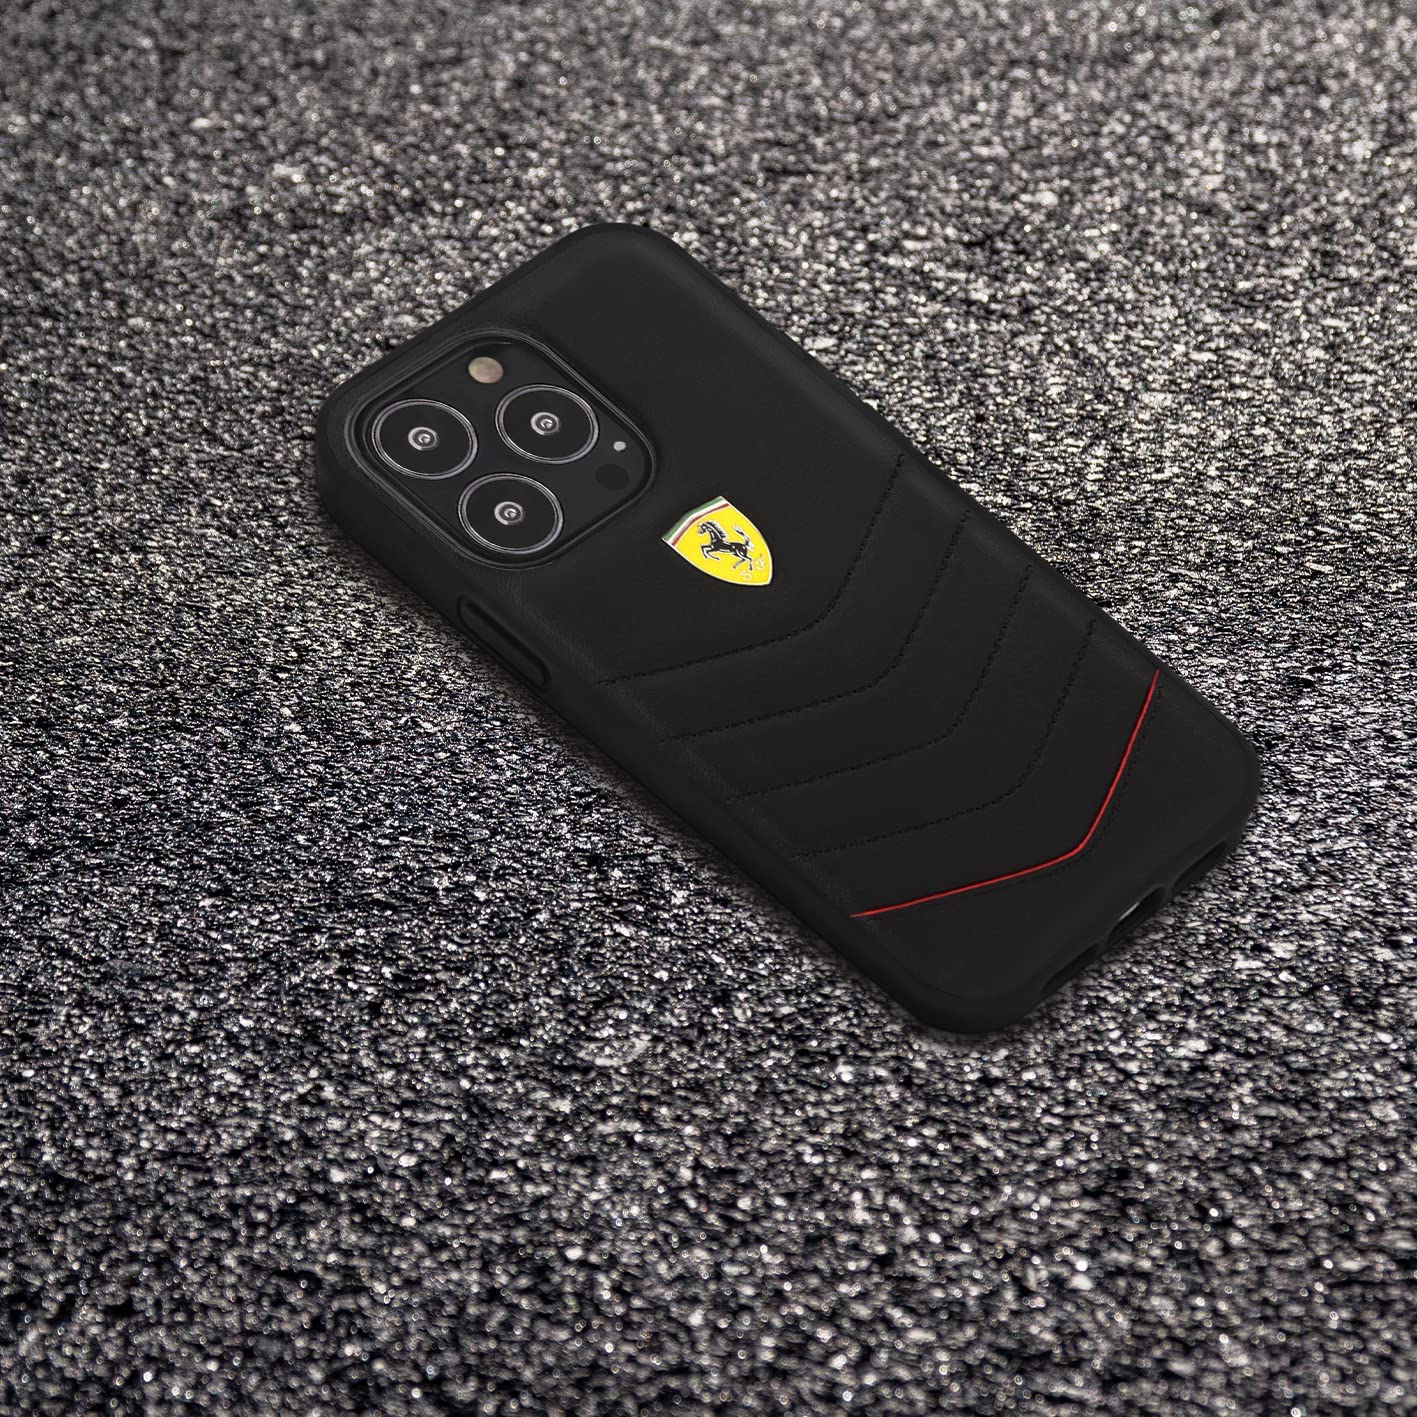 images/stories/virtuemart/product/Ferrari_QULTED_EDGE_leather_case_suitable_for_iPhone_13_Promex__7___1653508298_706